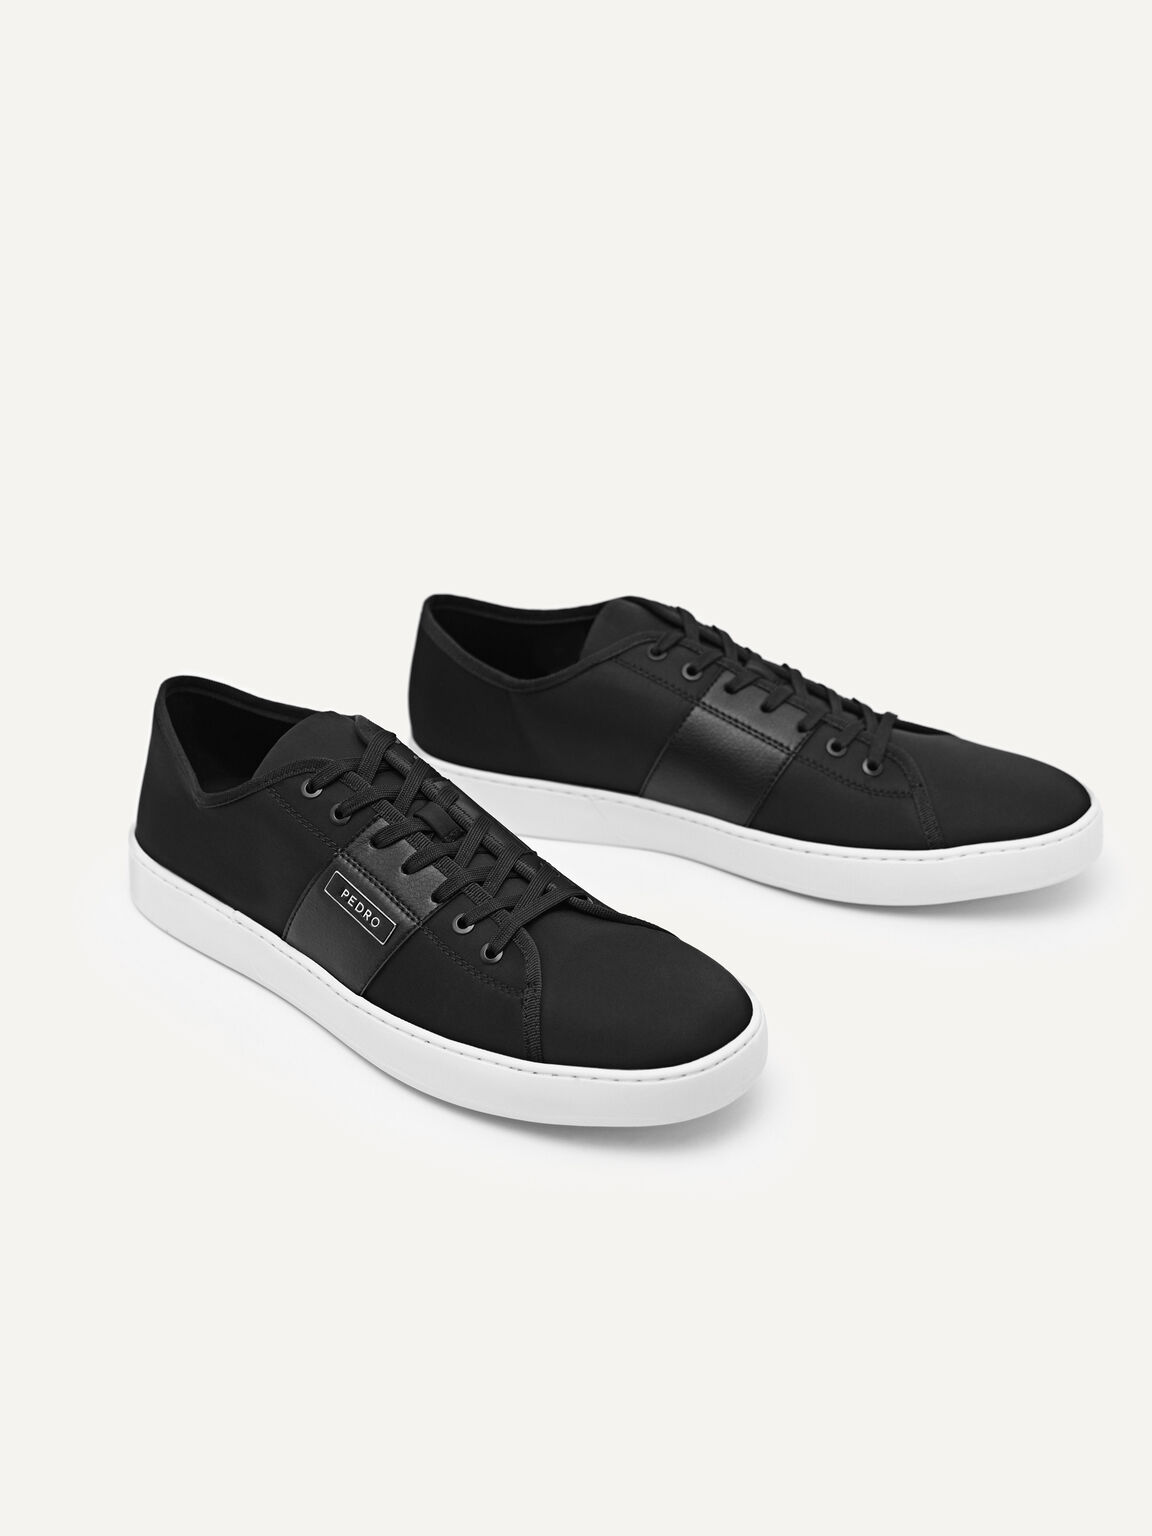 Lace-Up Sneakers, Black